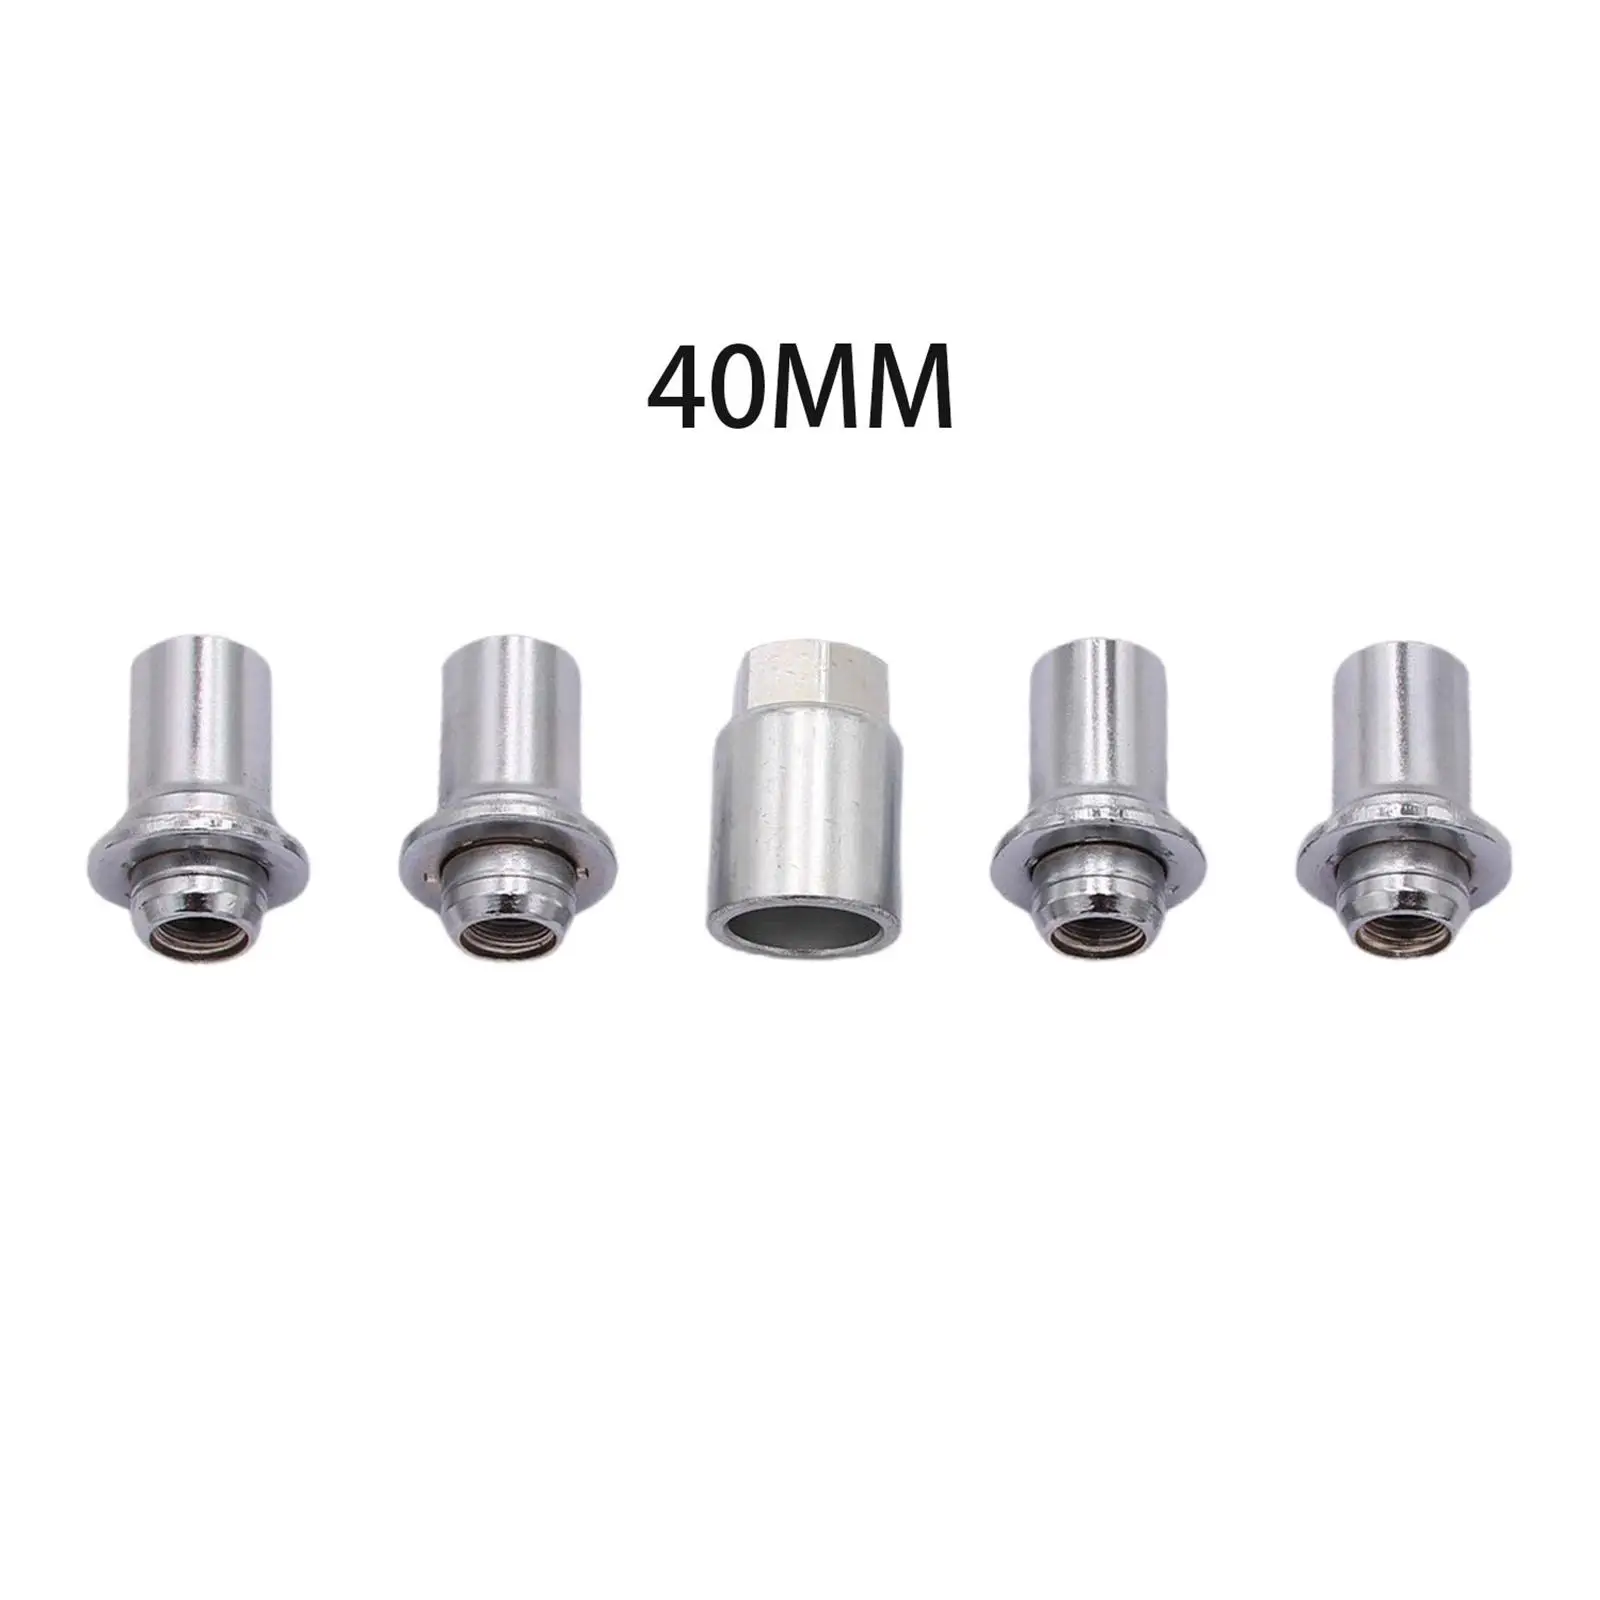 Metal Wheel Lock Set 00276-00901 Accessories Easy to Install Professional Direct Replaces Durable for Lexus Gx470 2003-2009